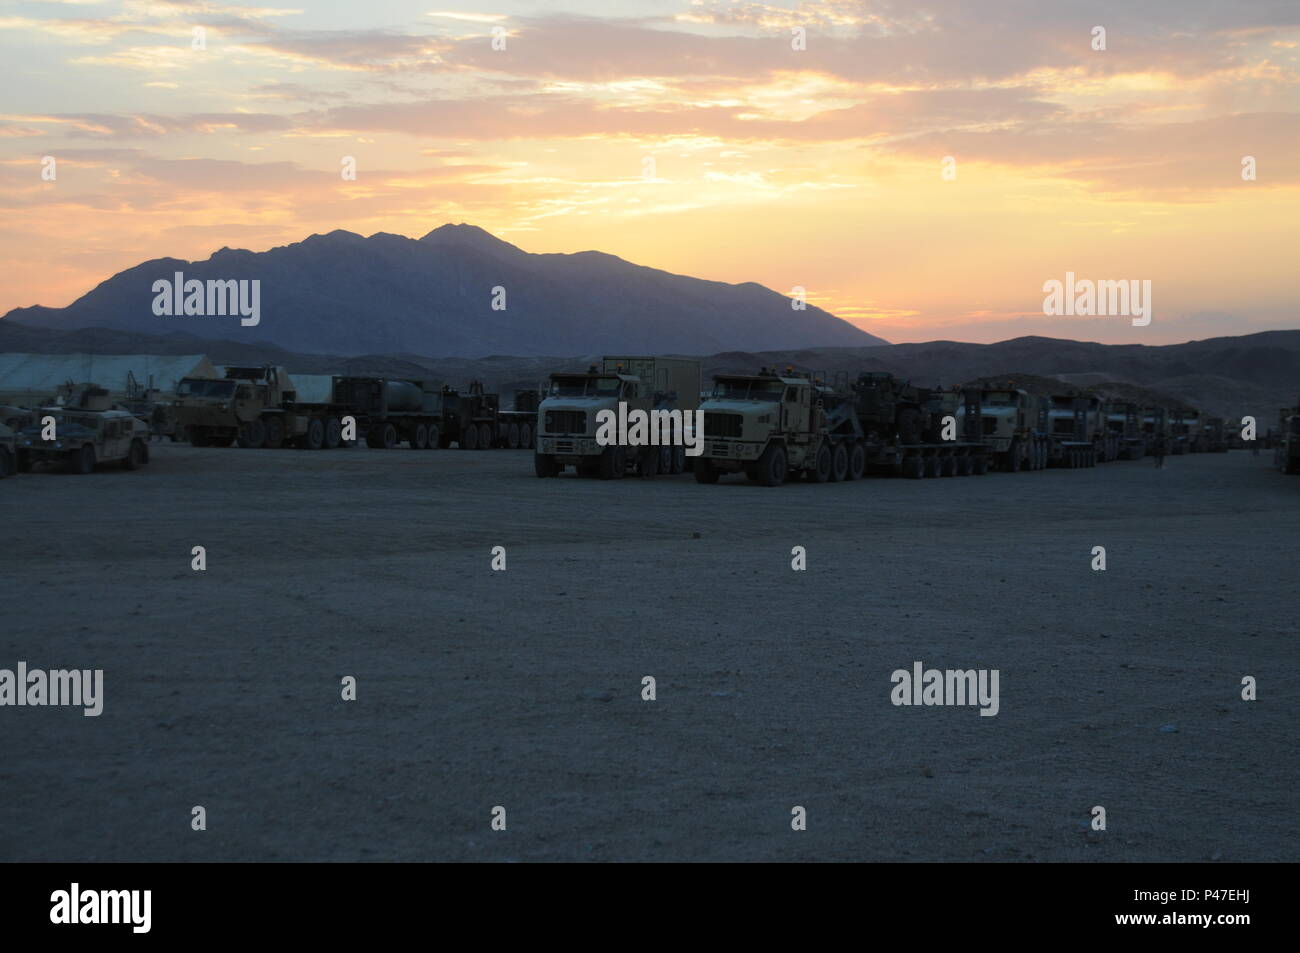 Soldiers assigned to the 630th Combat Sustainment Support Battalion wait for the ‘go ahead’ prior to tactically moving to the Rotational Unit Bivouac Area (RUBA) using convoy operations at Fort Irwin, California during the 16-07 National Training Center rotation on June 22, 2016. The 630th CSSB moved over 300 pieces of equipment and over 400 personnel while conducting logistics operations at the NTC, which is a training facility designed to simulate real-life combat scenarios testing warriors’ readiness utilizing their military occupational specialty in a high-up-tempo environment.  (U.S. Army Stock Photo